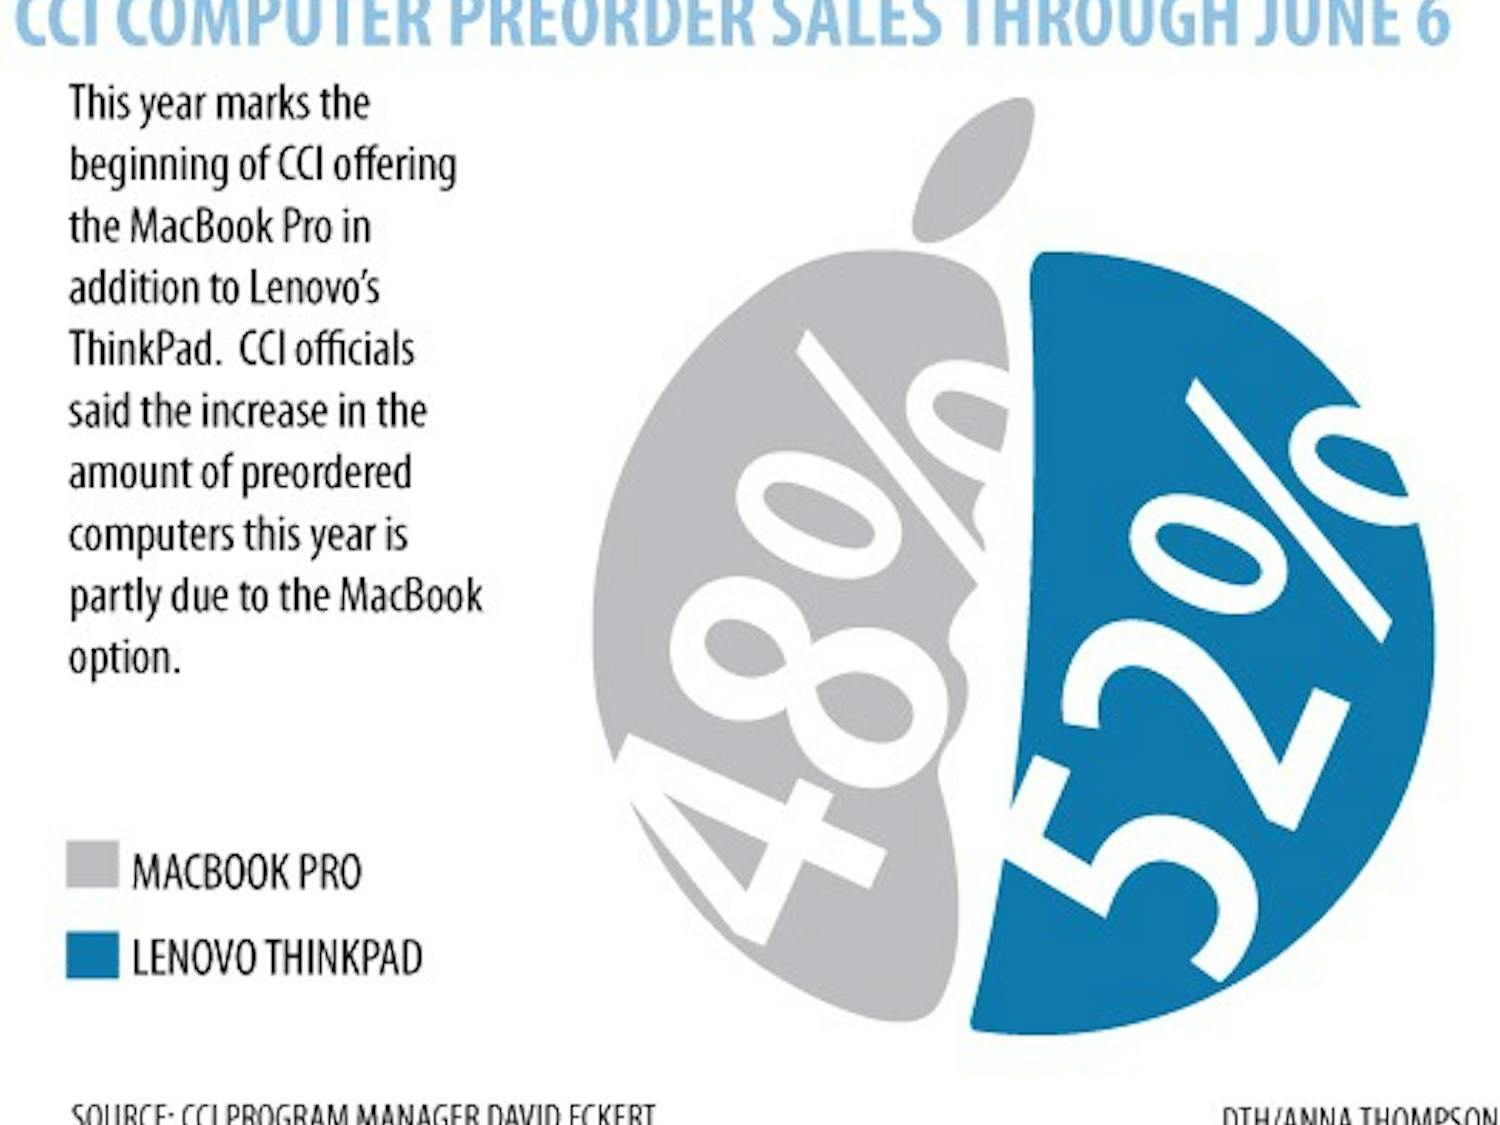 Graphic: In first year, Apple claims large share of CCI orders (Anna Thompson)